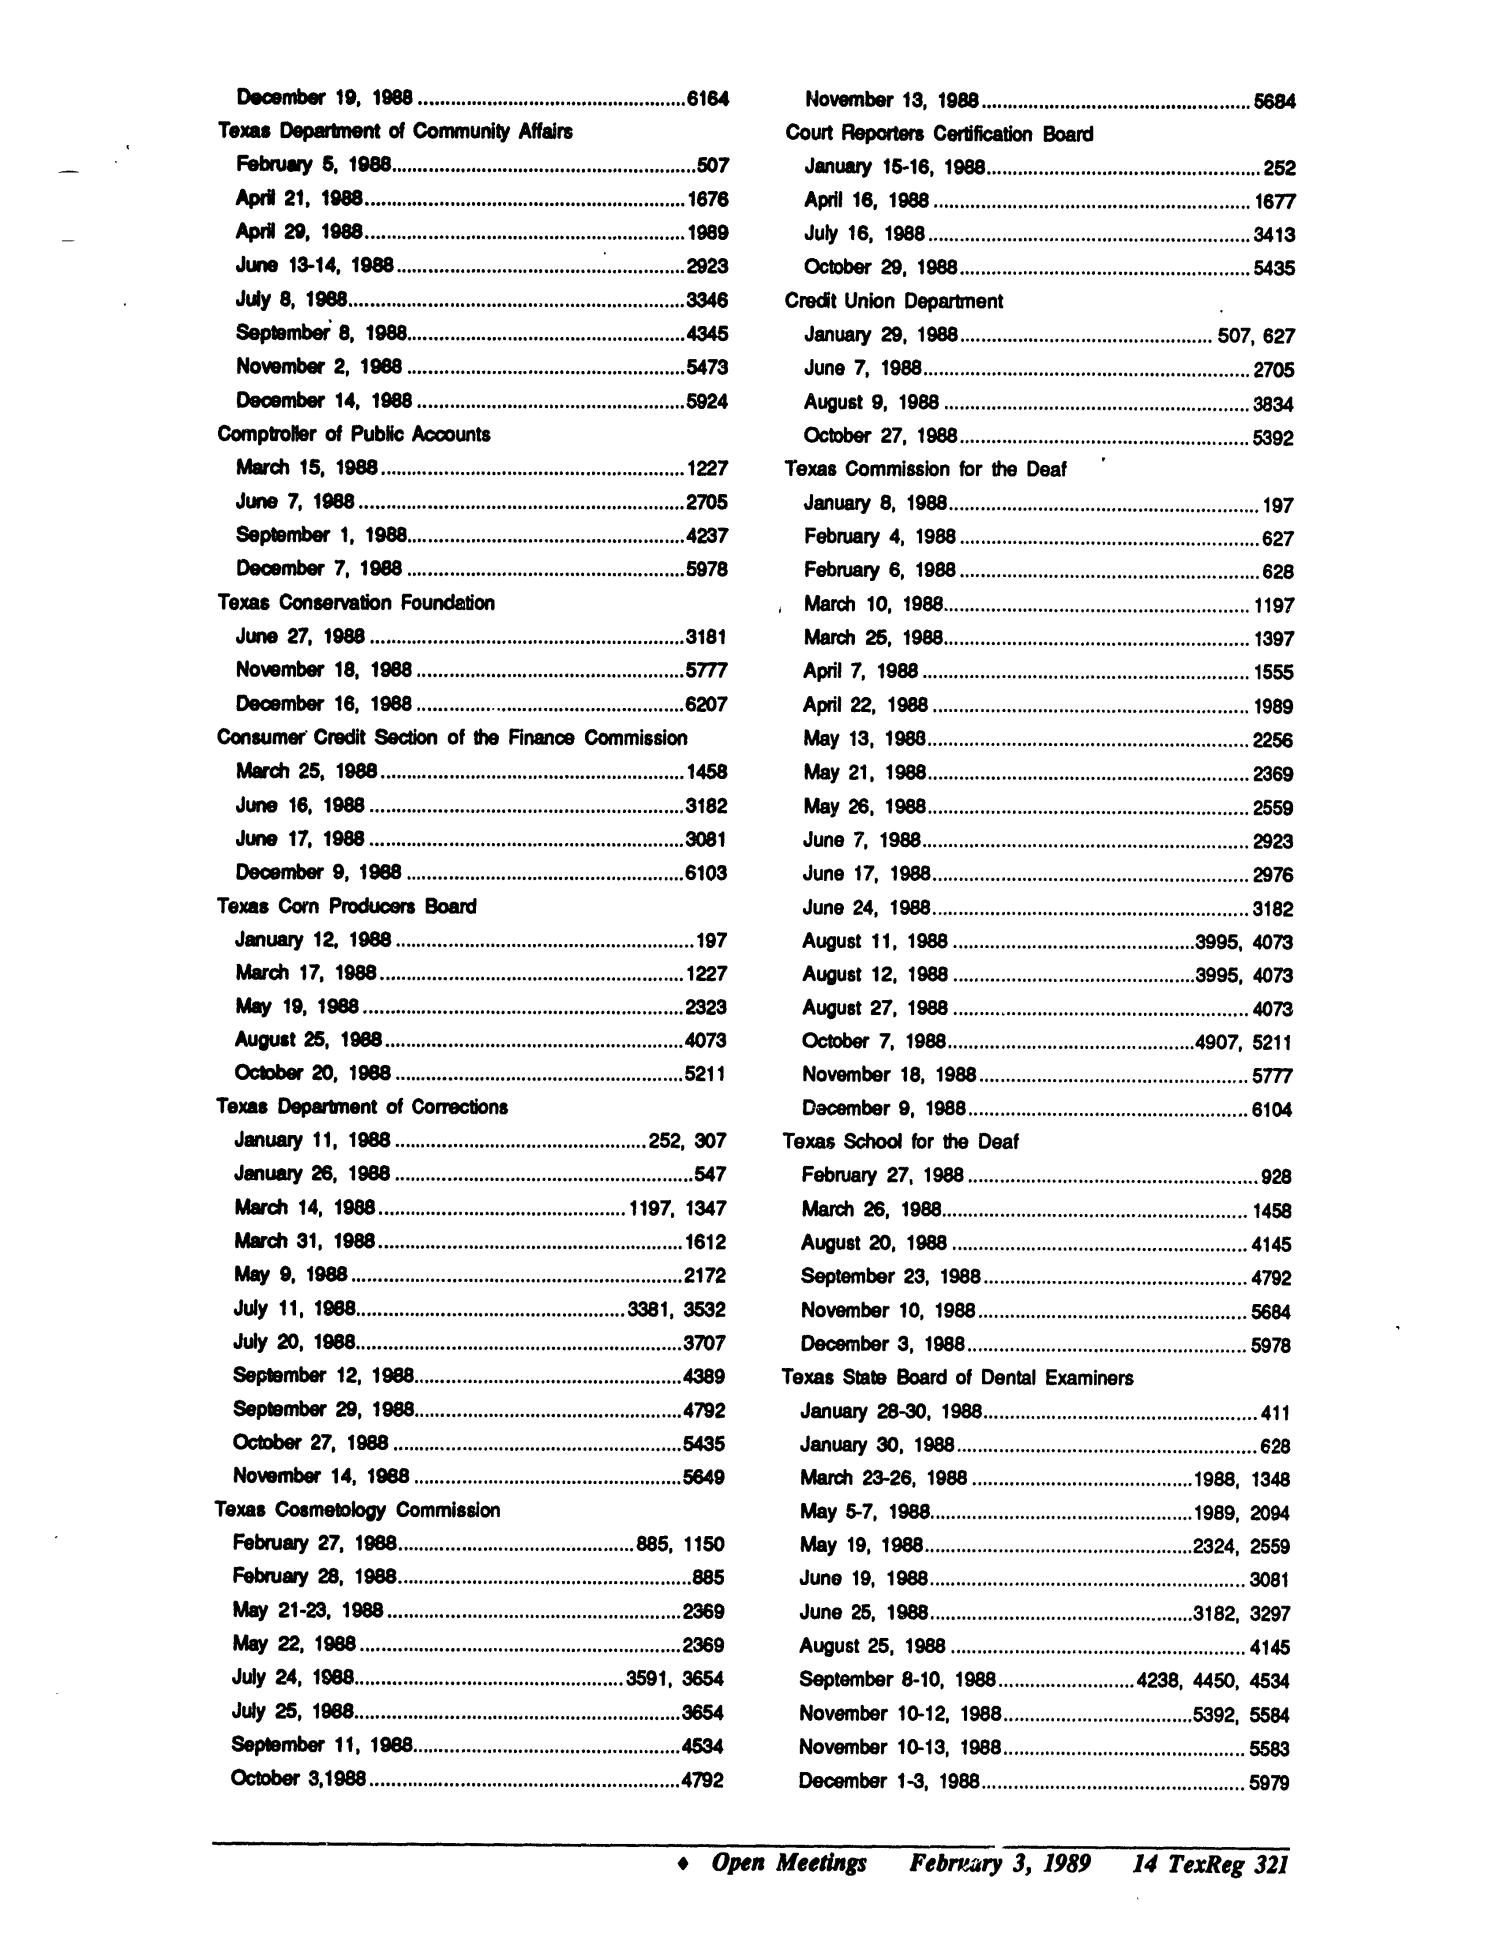 Texas Register: Annual Index January - December 1988, Volume 13 Numbers [1-96] - pages 225-350, February 3, 1989
                                                
                                                    321
                                                